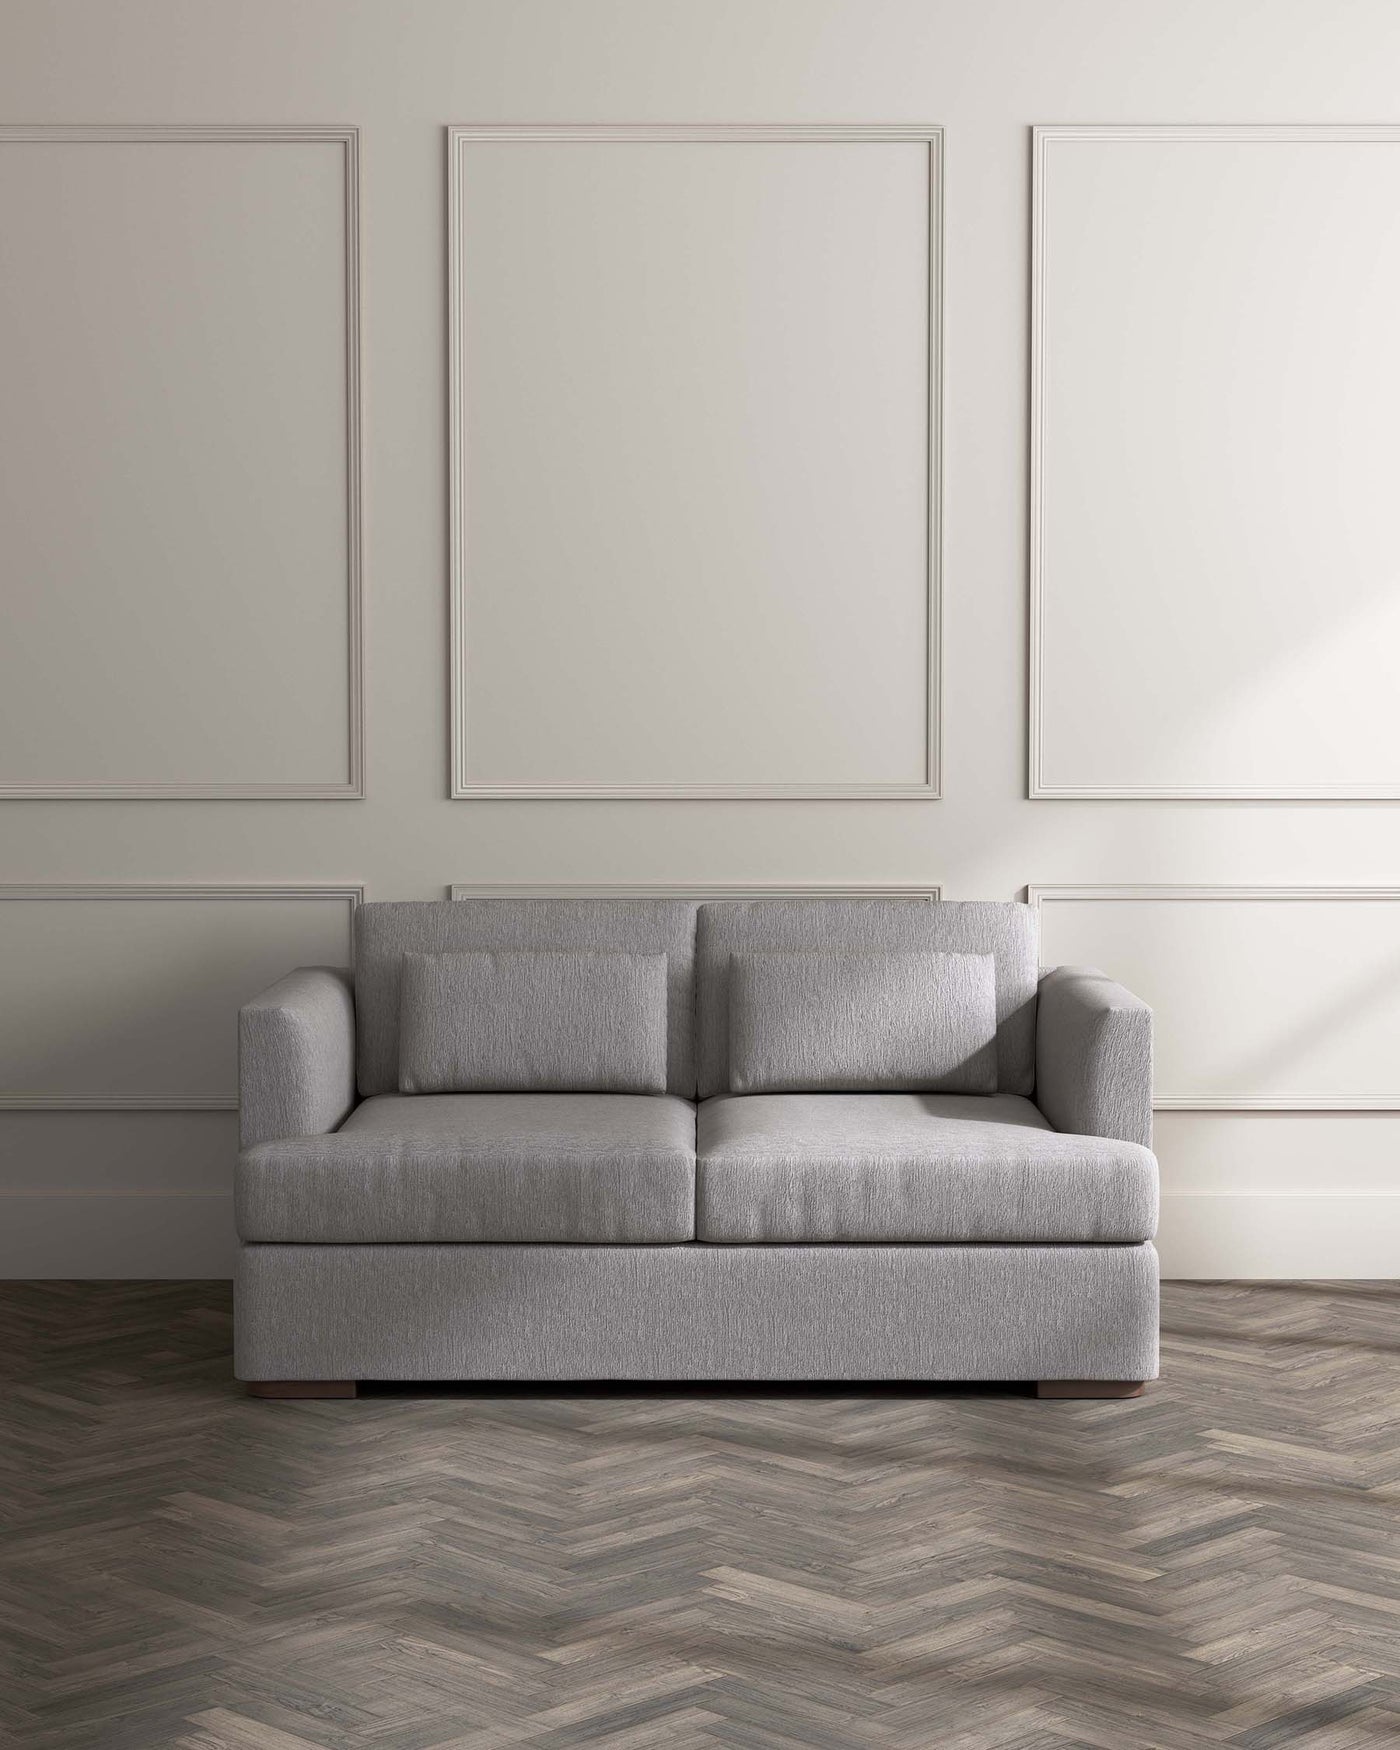 A modern grey fabric three-seater sofa with clean lines and a minimalist design, featuring plush cushions and a square armrest. Set against a neutral wall with two blank framed art pieces above, on a herringbone patterned wooden floor.